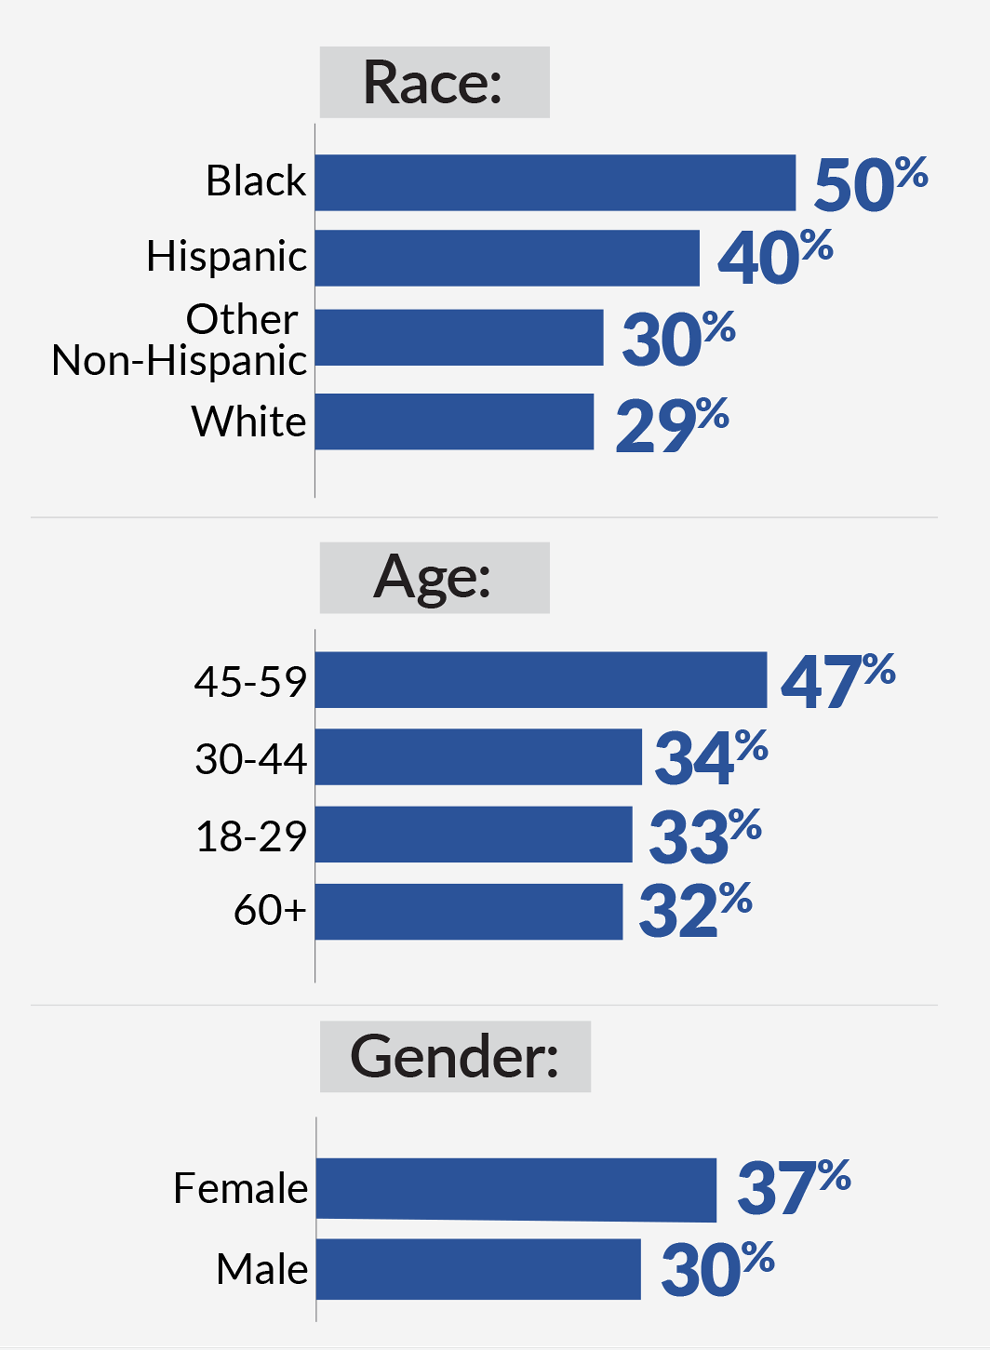 And the third graphic is a series of three bar charts showing borrowers’ likelihood of experiencing default based on their race, age, and gender. Under race, the likelihood of experiencing default if you are Black, Hispanic, Other Non-Hispanic, and White, are 50%. 40%, 30%, and 29%, respectively. For age, 47% of borrowers 45 to 59 had experienced default. The age brackets of 30 to 44, 18 to 29, and 60-plus were 34%, 33%, and 32%, respectively. And the bottom of the demographic page shows that that 37% of female borrowers said they had experienced default compared with 30% of male borrowers. 